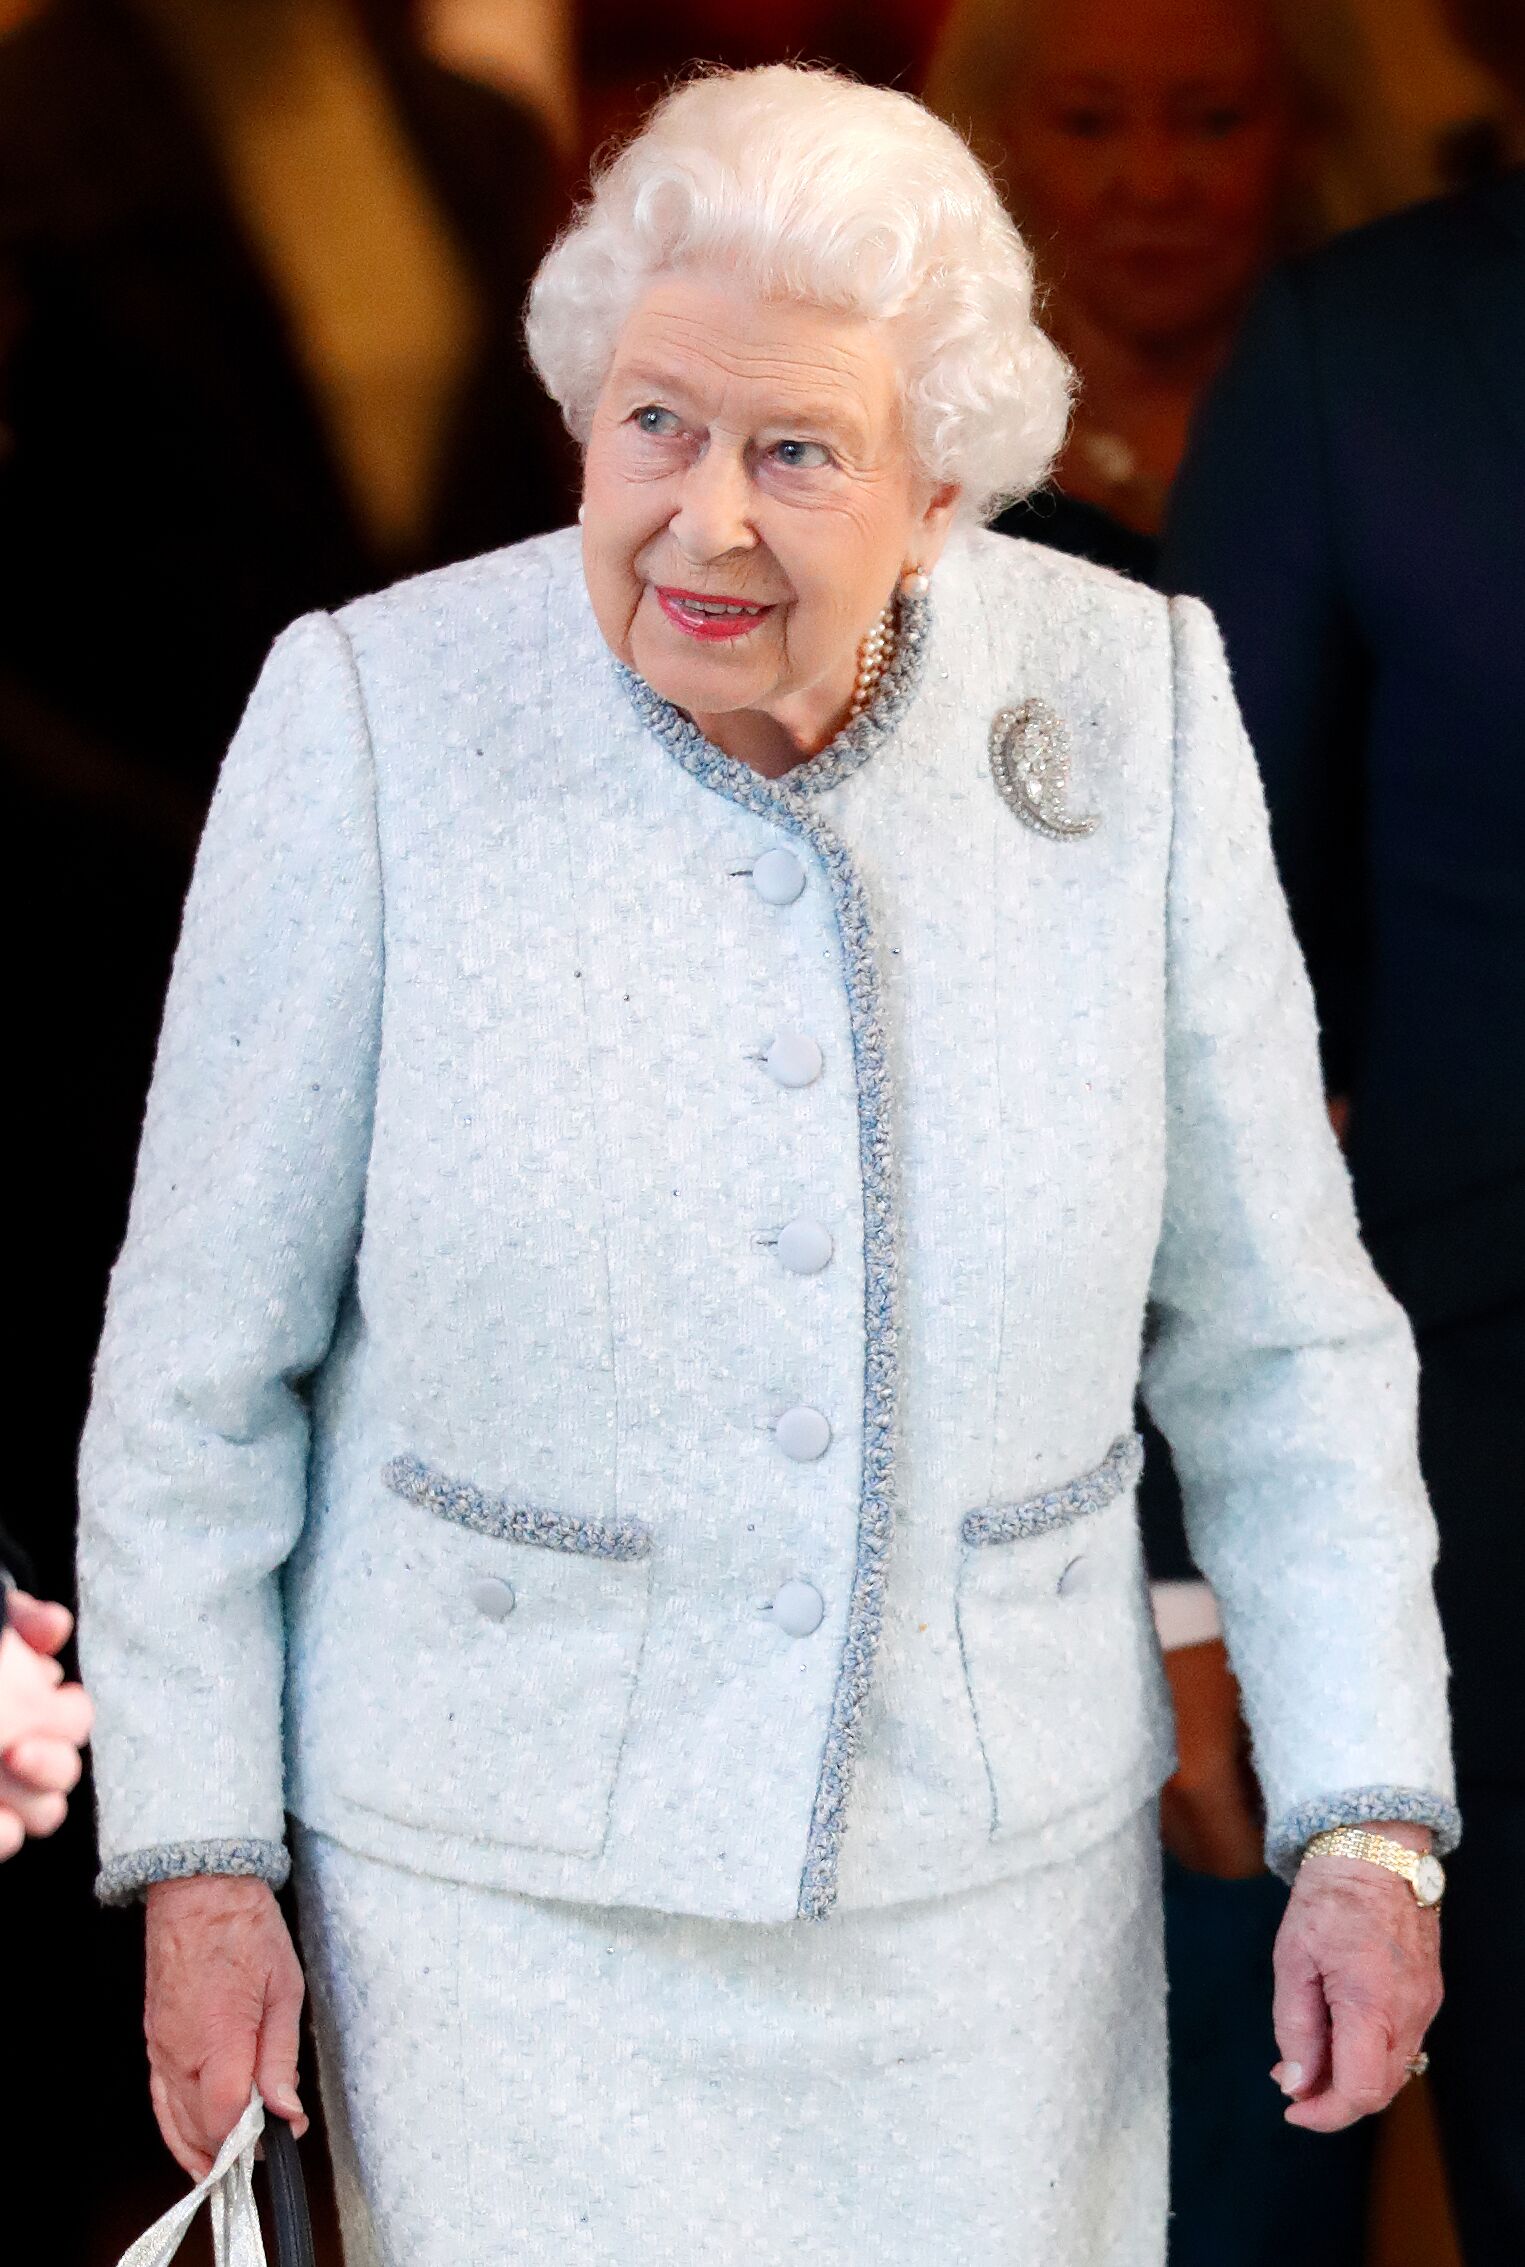 Queen Elizabeth II at a Christmas lunch on December 11, 2018, in London, England. | Source: Getty Images